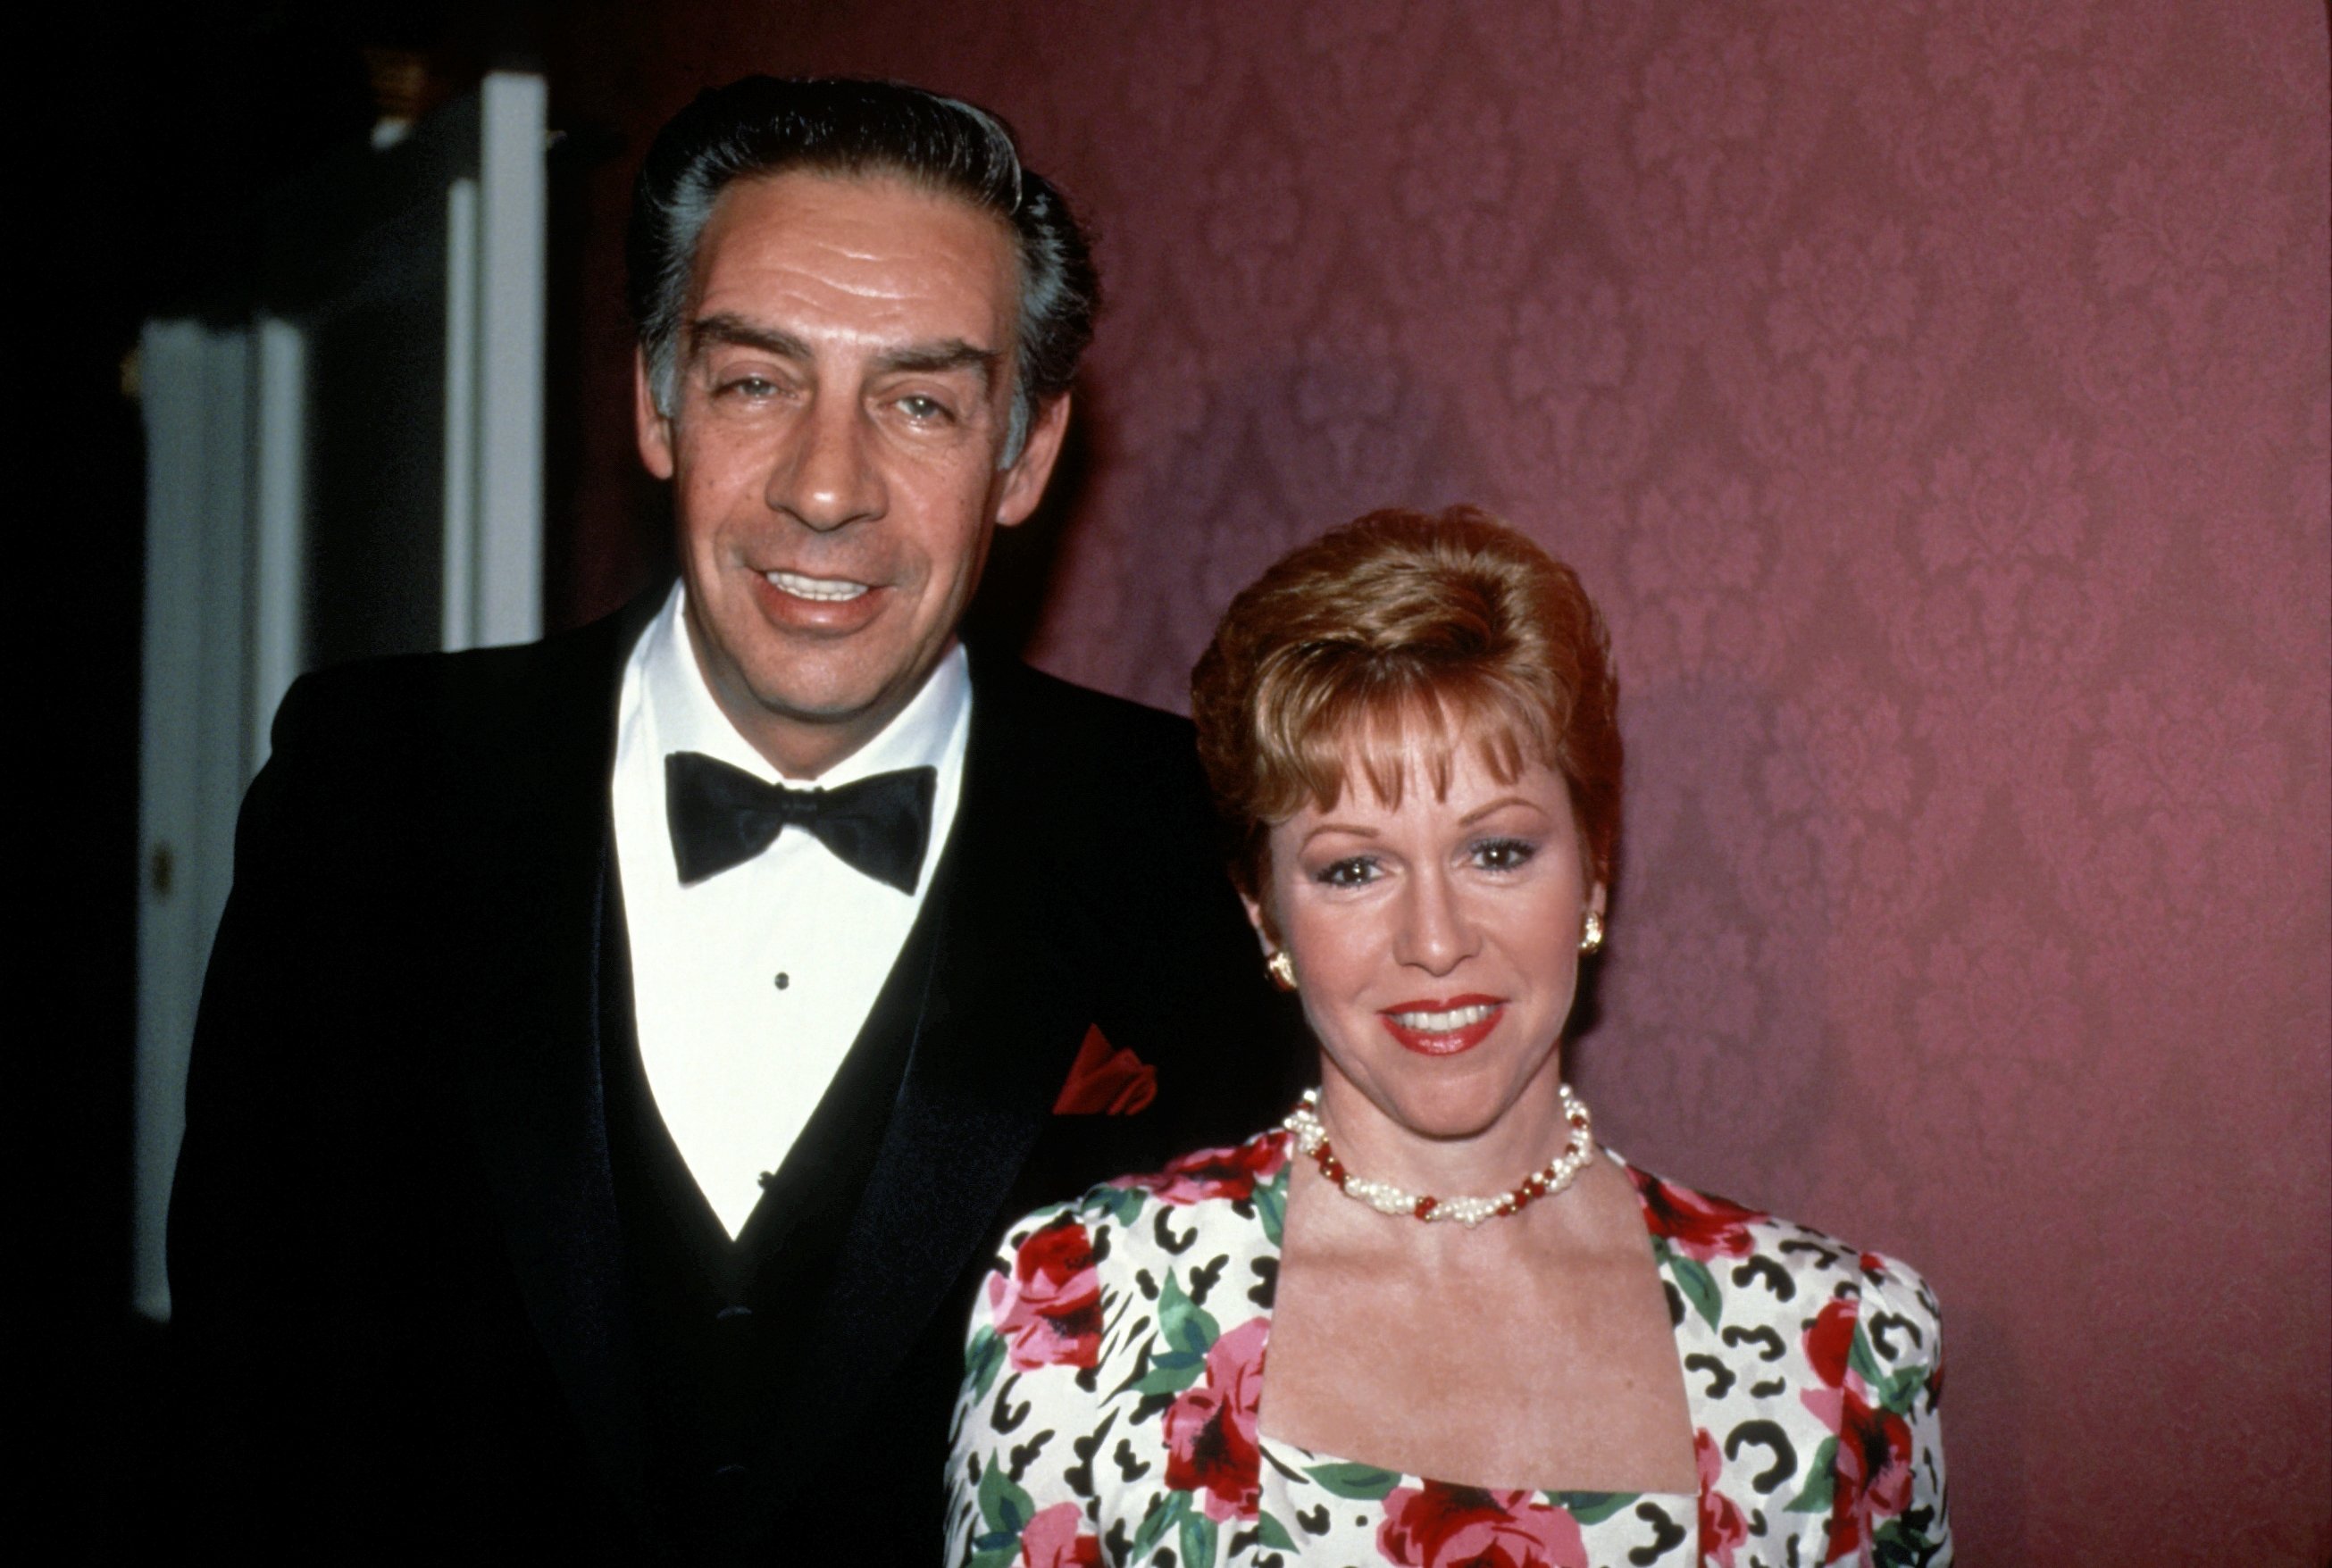 Elaine Orbach and Jerry Orbach circa 1990 | Source: Getty Images